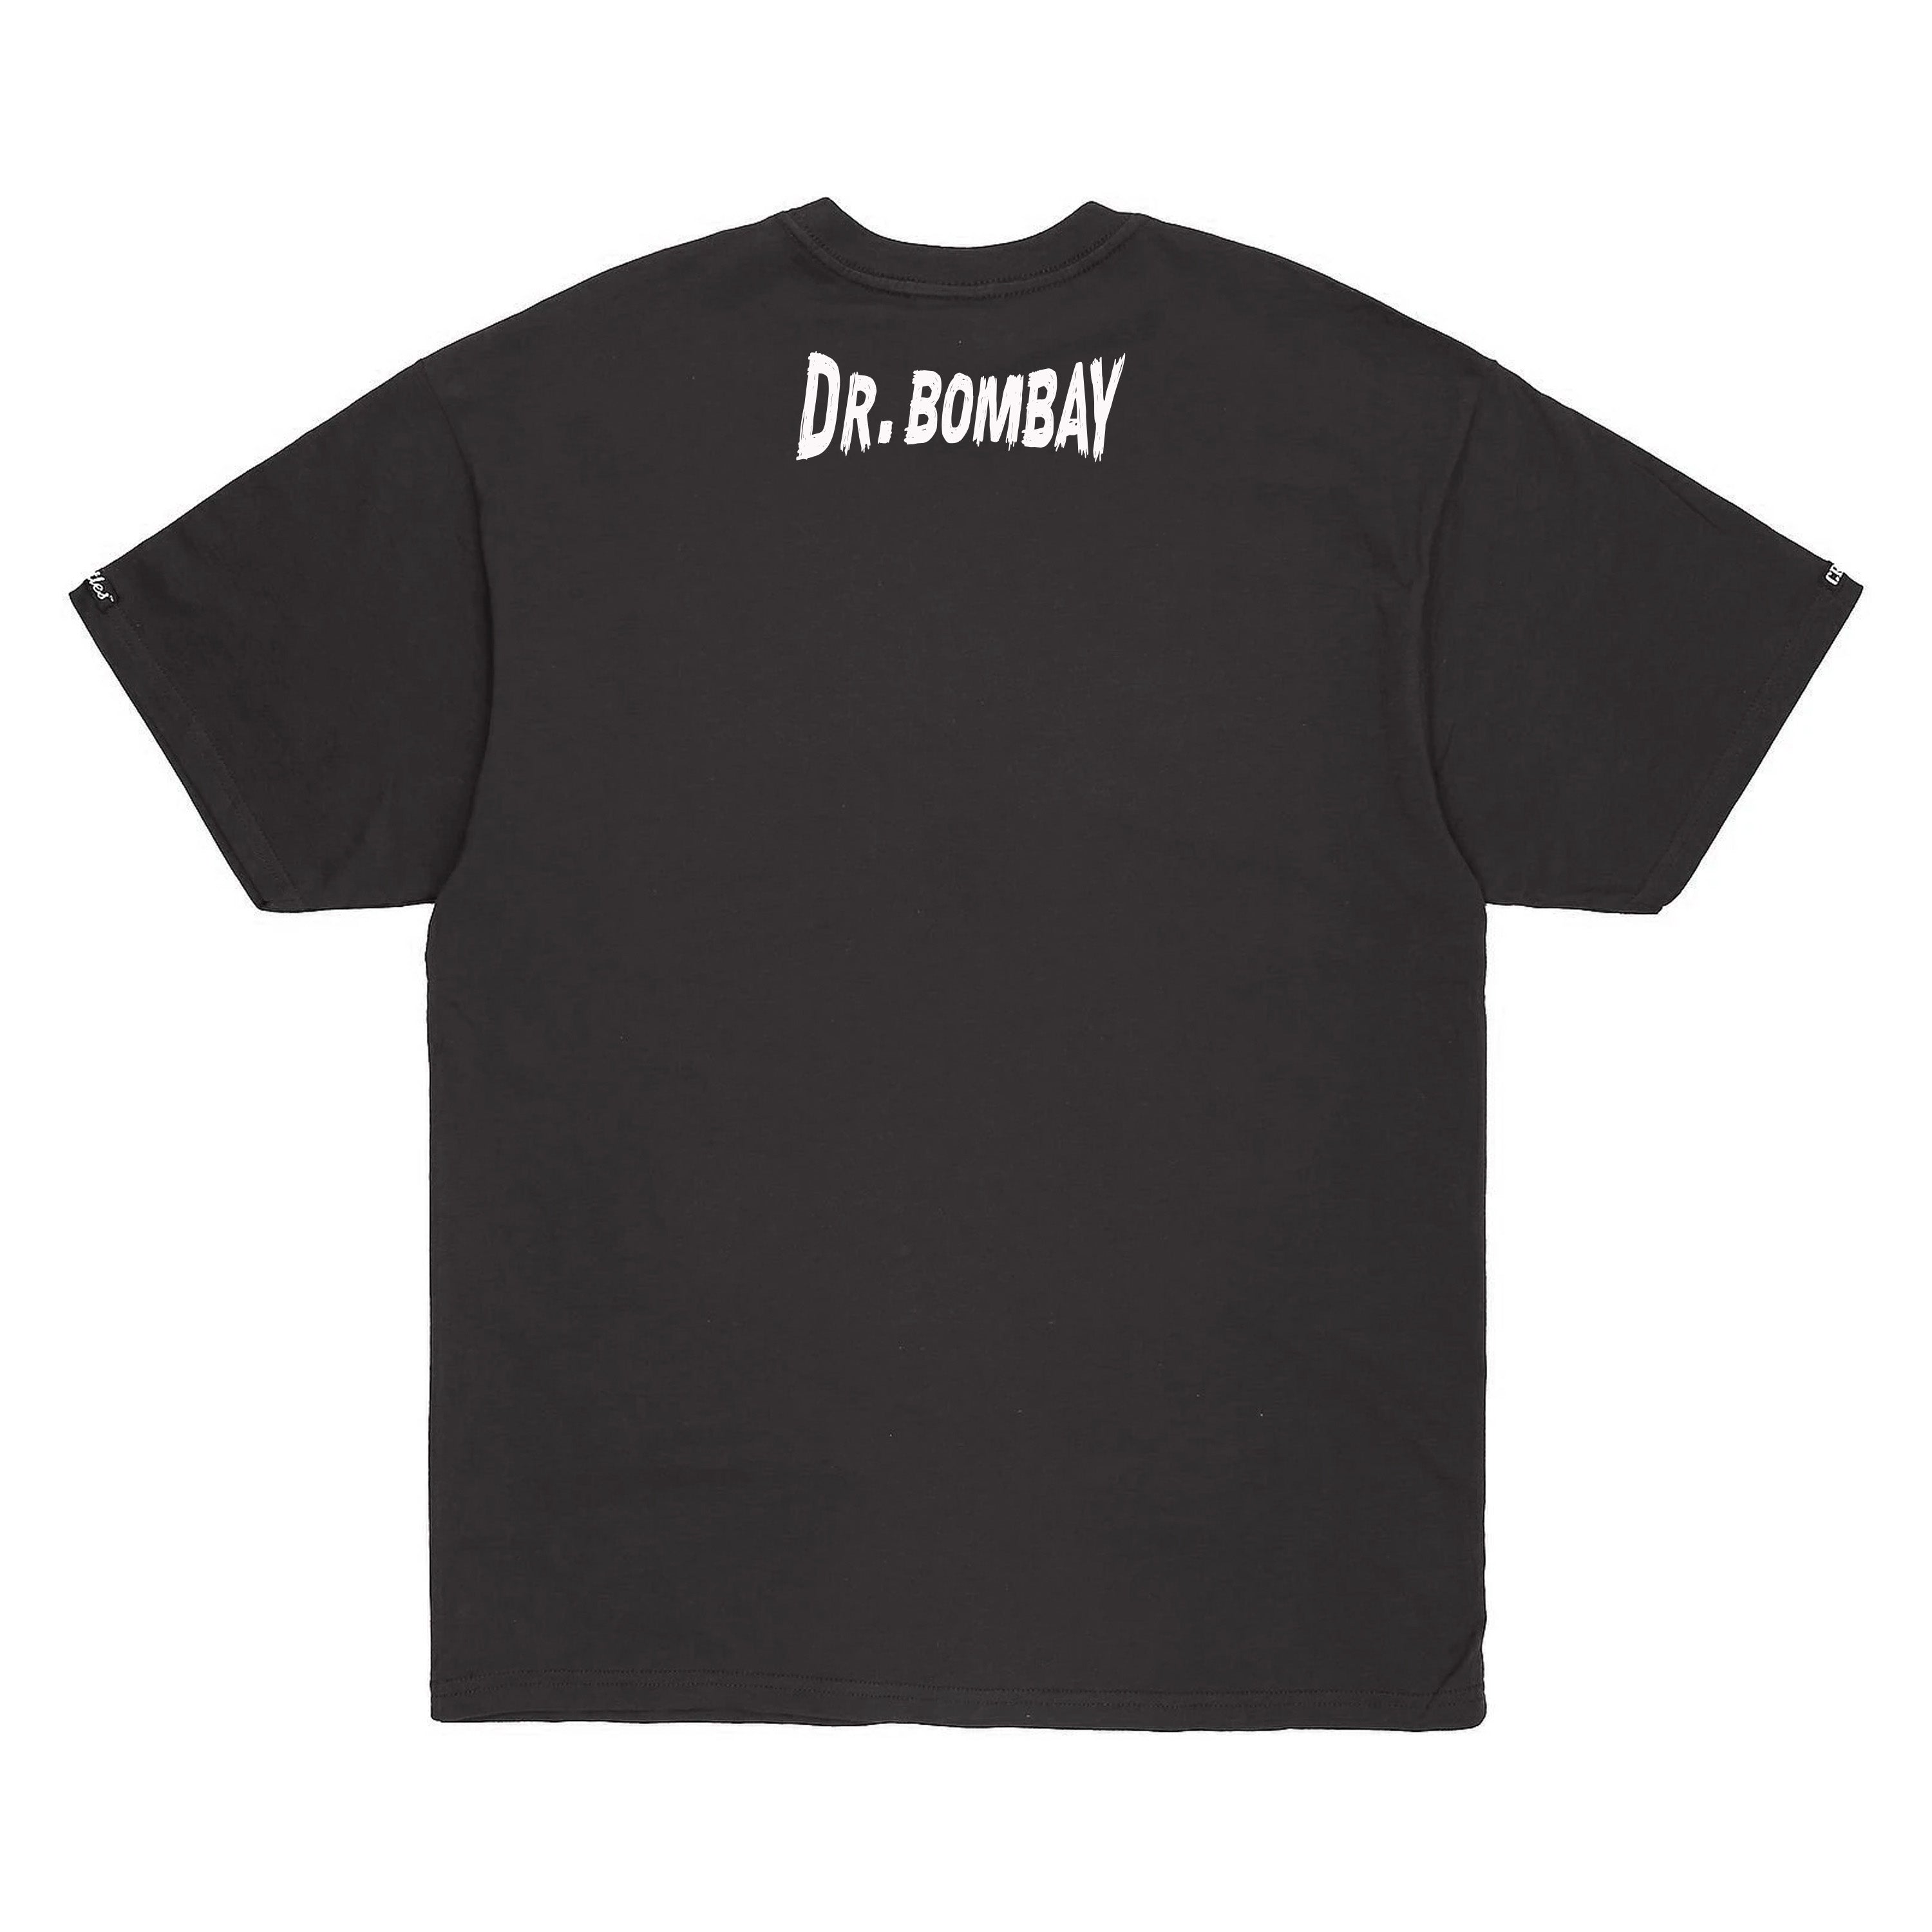 Dr. Bombay Silhouette Tee Black